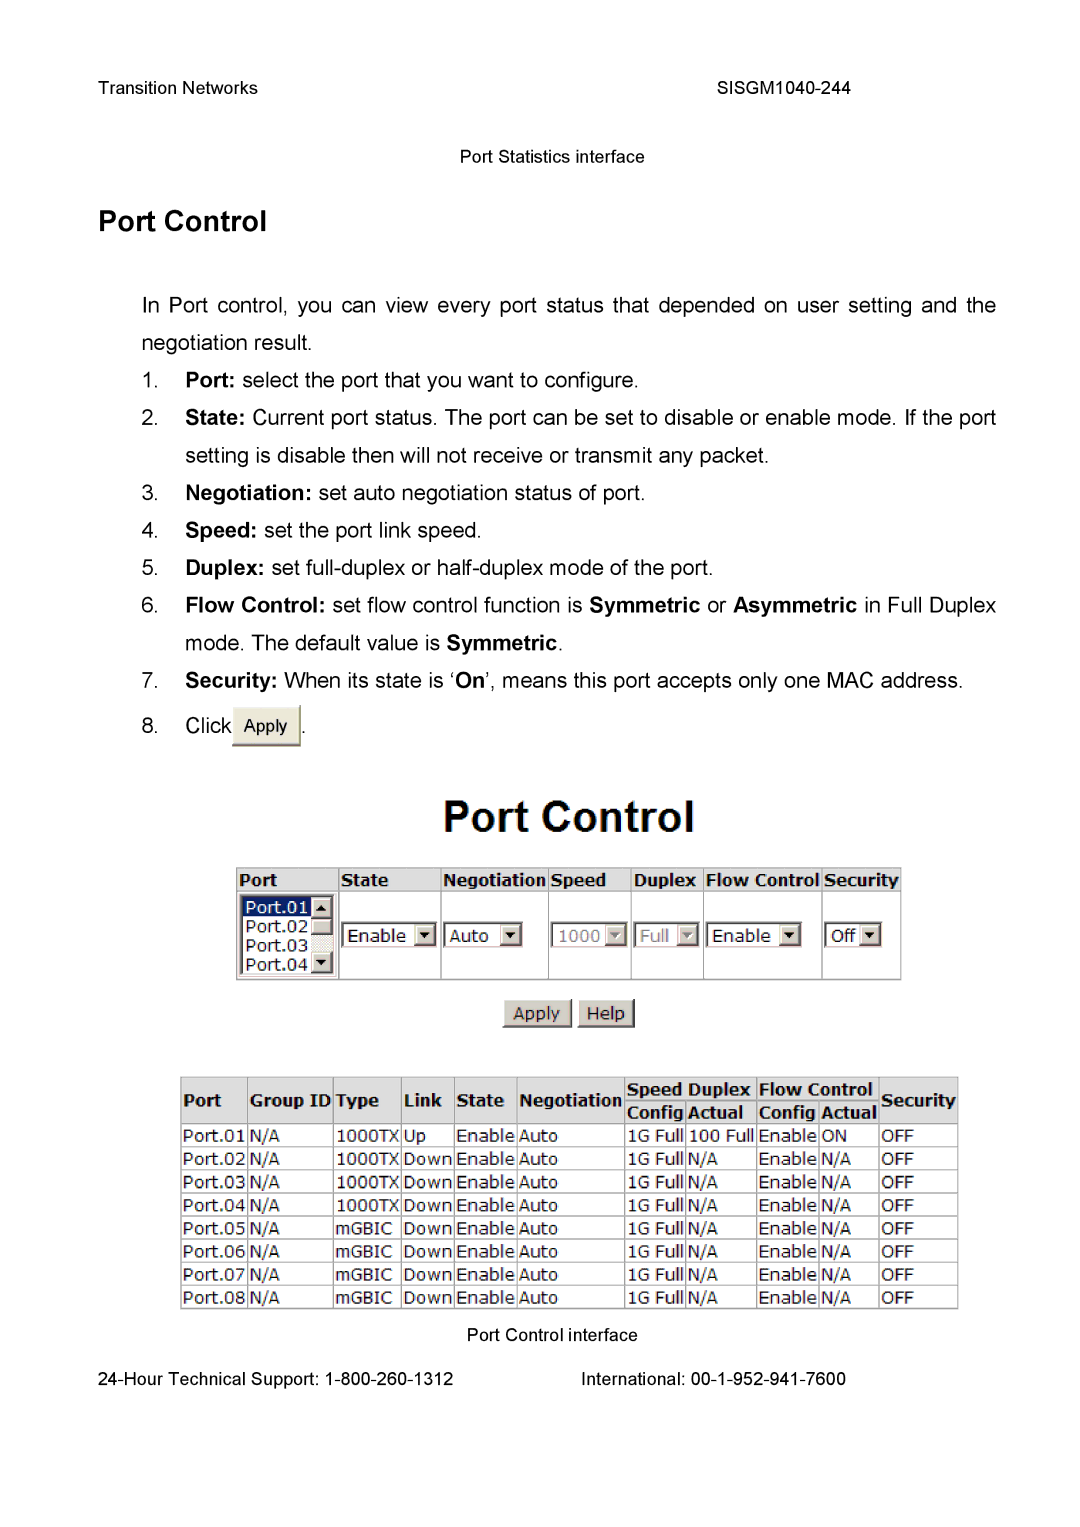 Transition Networks SISGM1040-244 user manual Port Control 